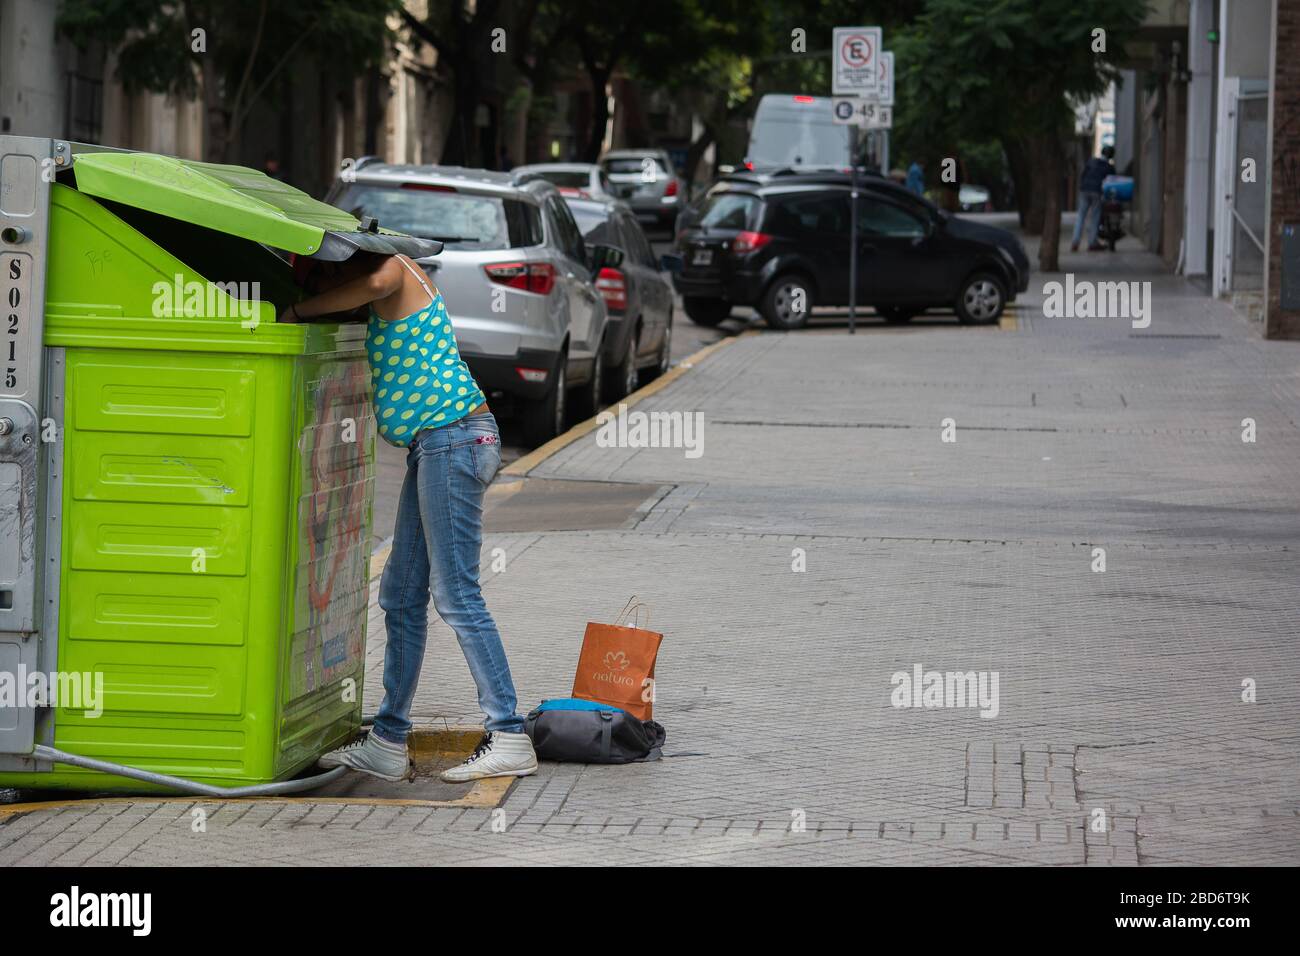 Rosario, Argentina - Julio 25, 2019: Homeless people living in the streets Stock Photo